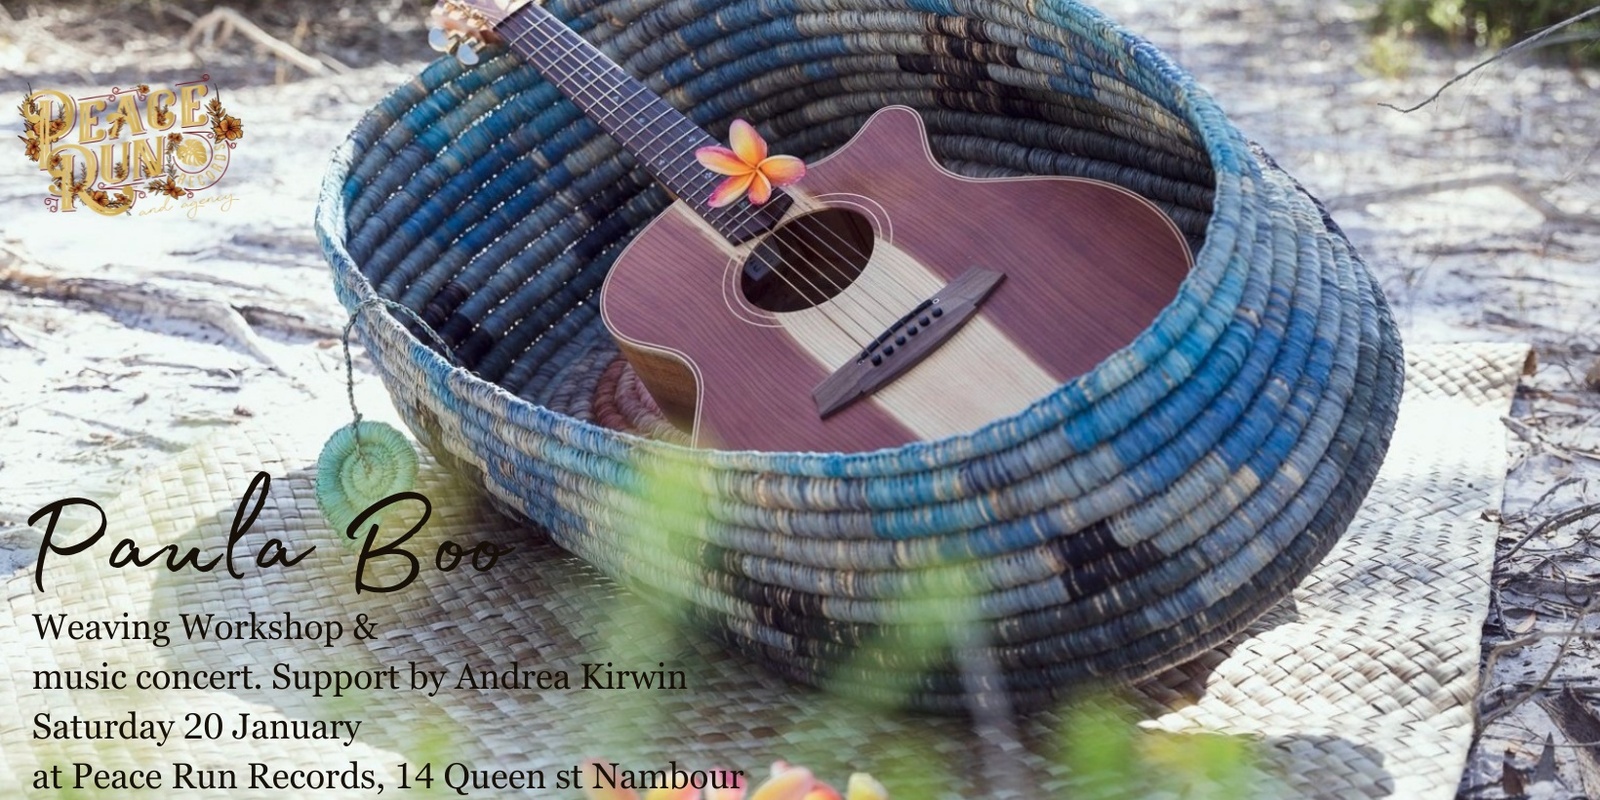 Banner image for Paula Boo Weaving Workshop and Concert at Peace Run Records, Nambour